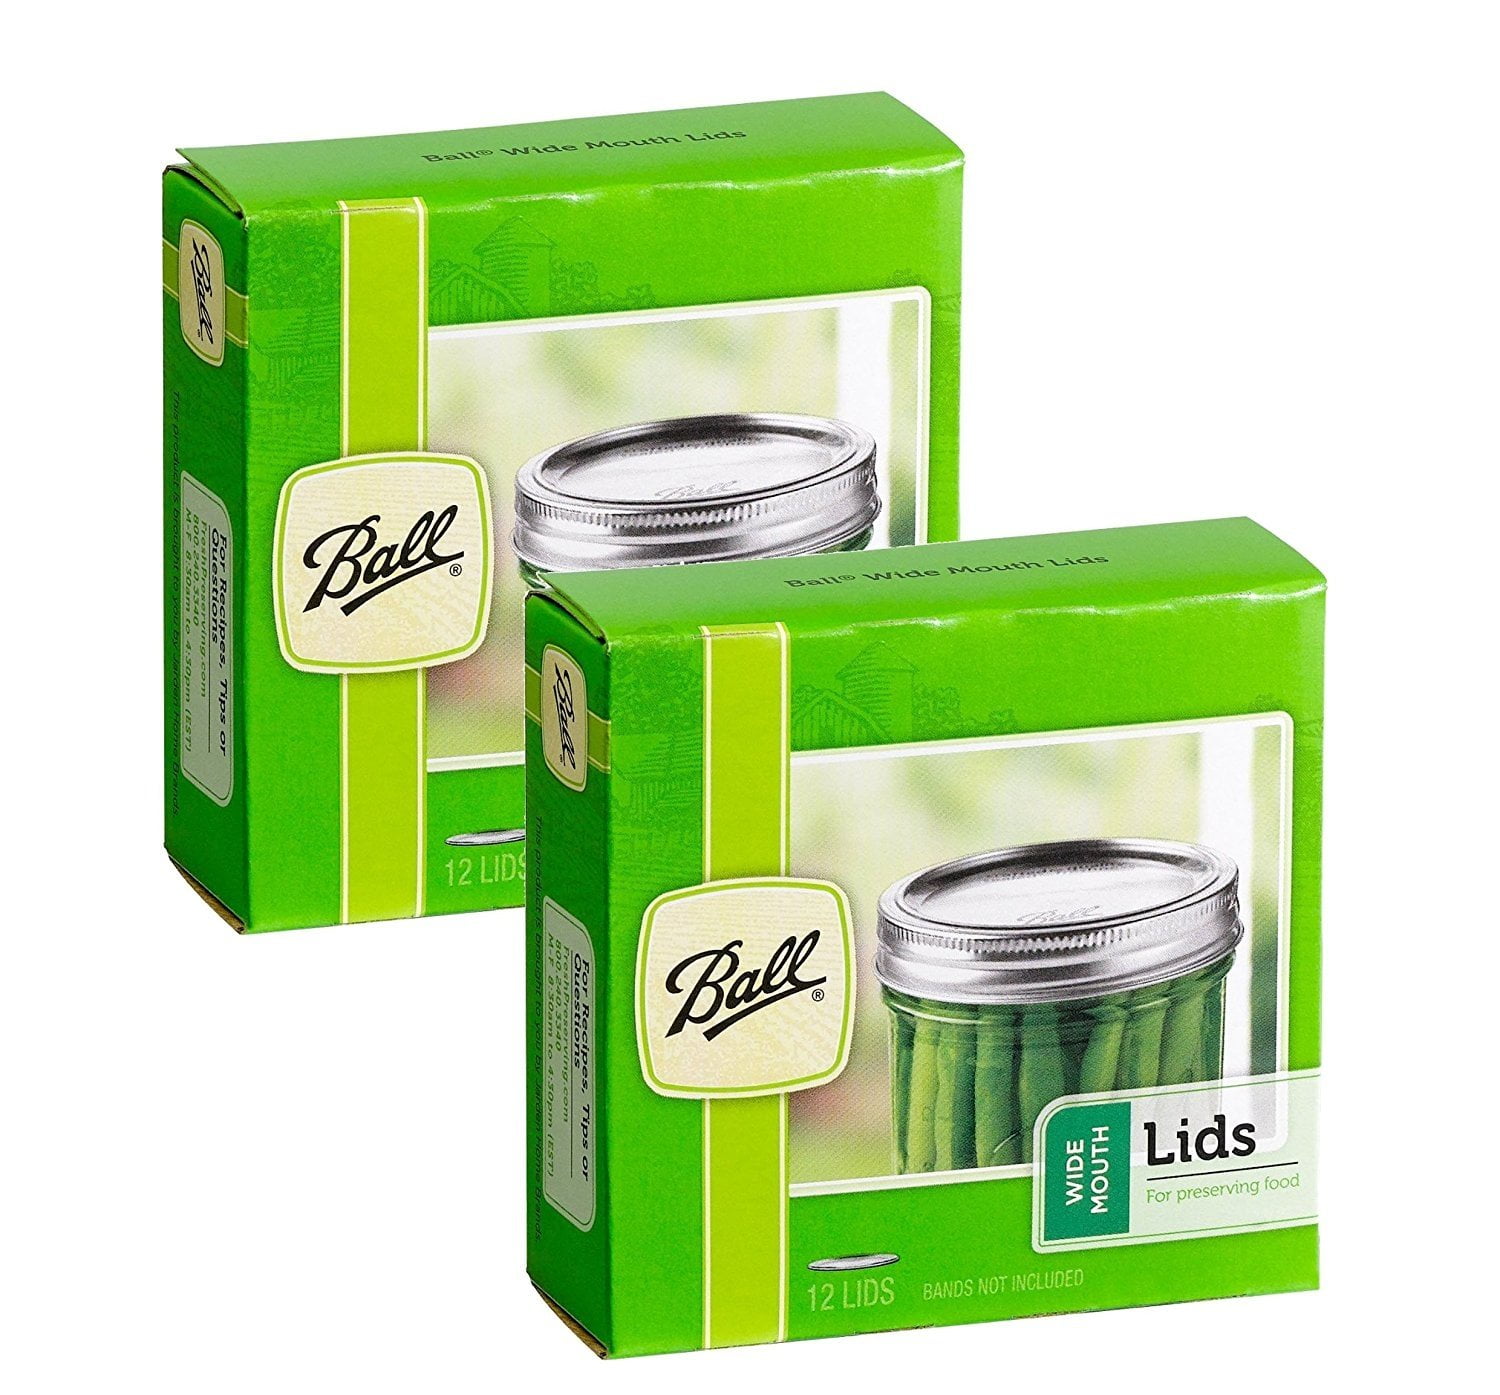 48 Total Lids 4 Packs of 12 Lids BALL WIDE Mouth Canning Lids Sure Tight New